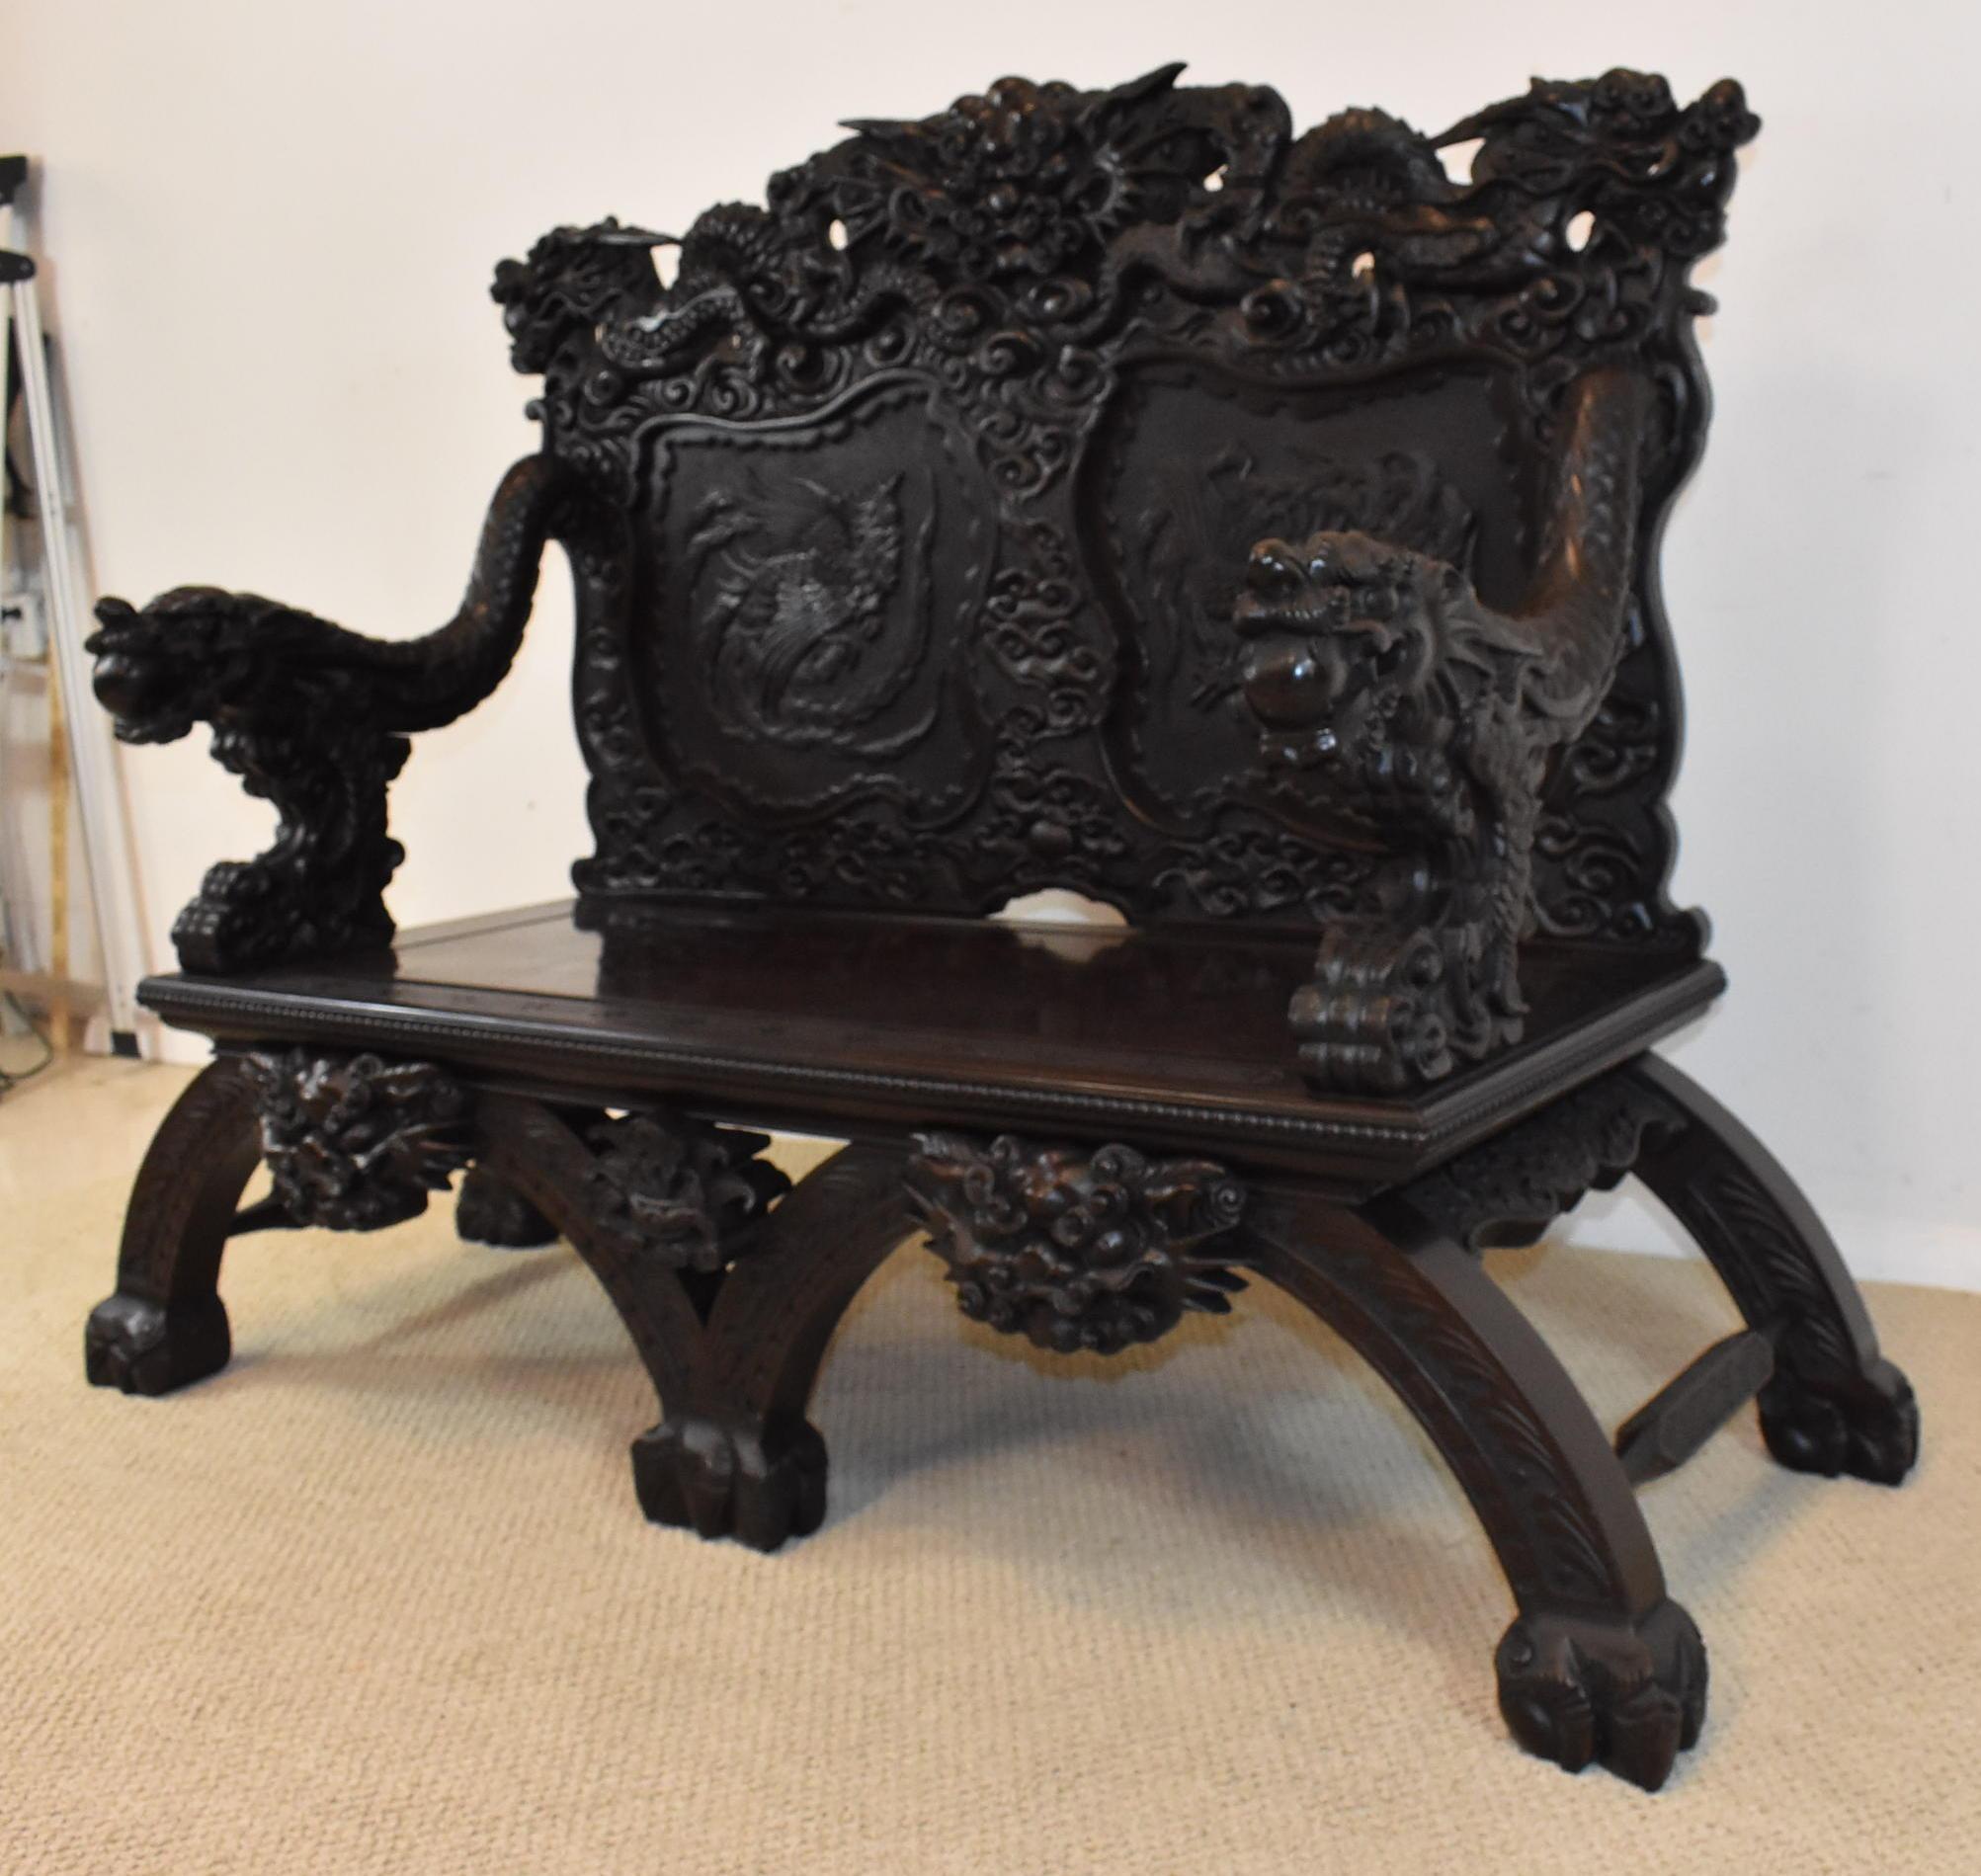 Very heavily carved dark wood Chinese dragon head bench. Chinese pheasants carved into the back. Very good condition. Light wear. Dimensions: 24